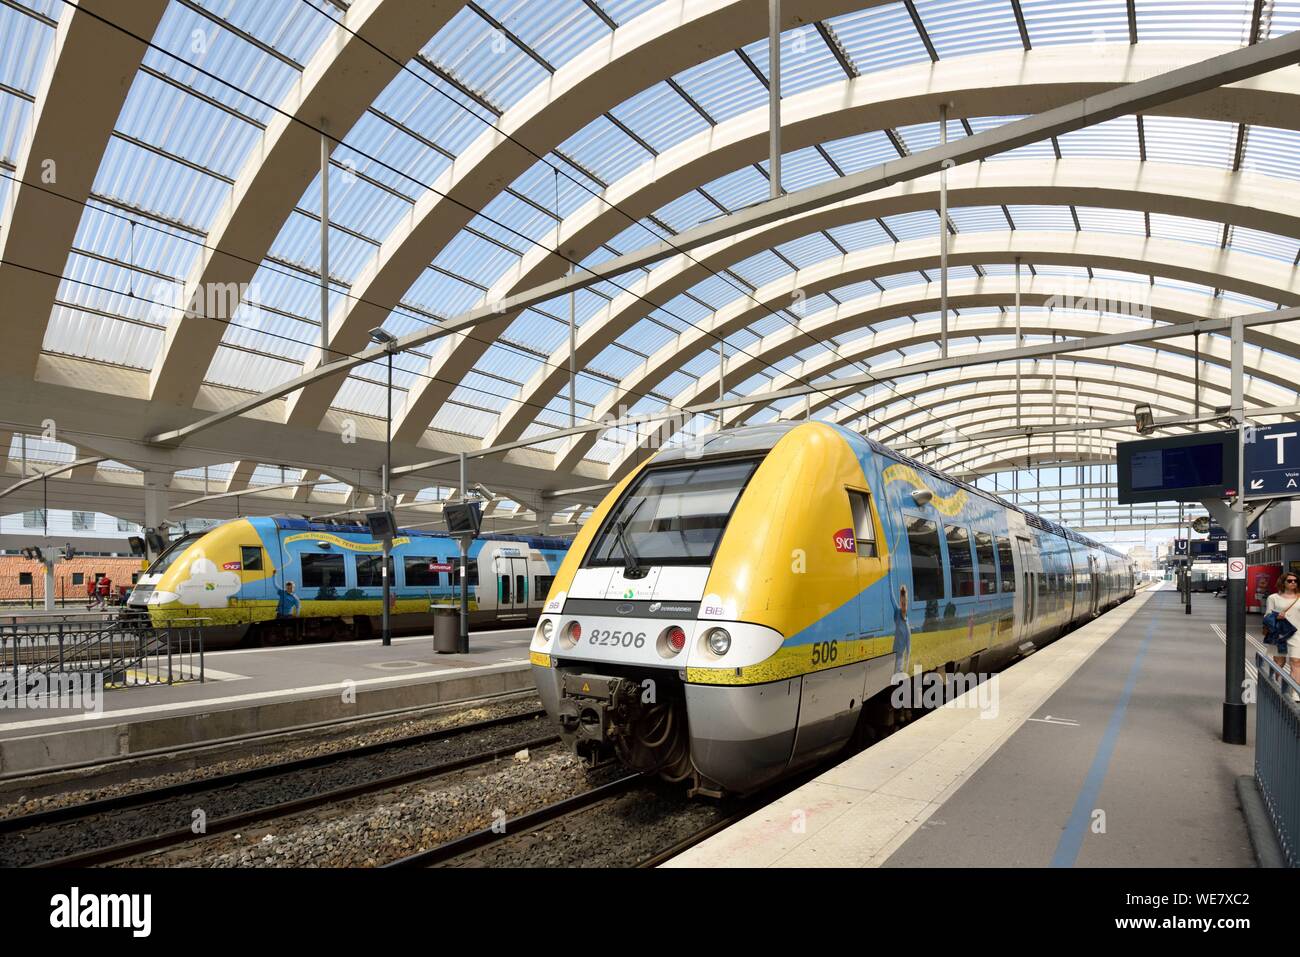 France, Marne, Reims, train station, yellow train and blue train parked along the docks Stock Photo